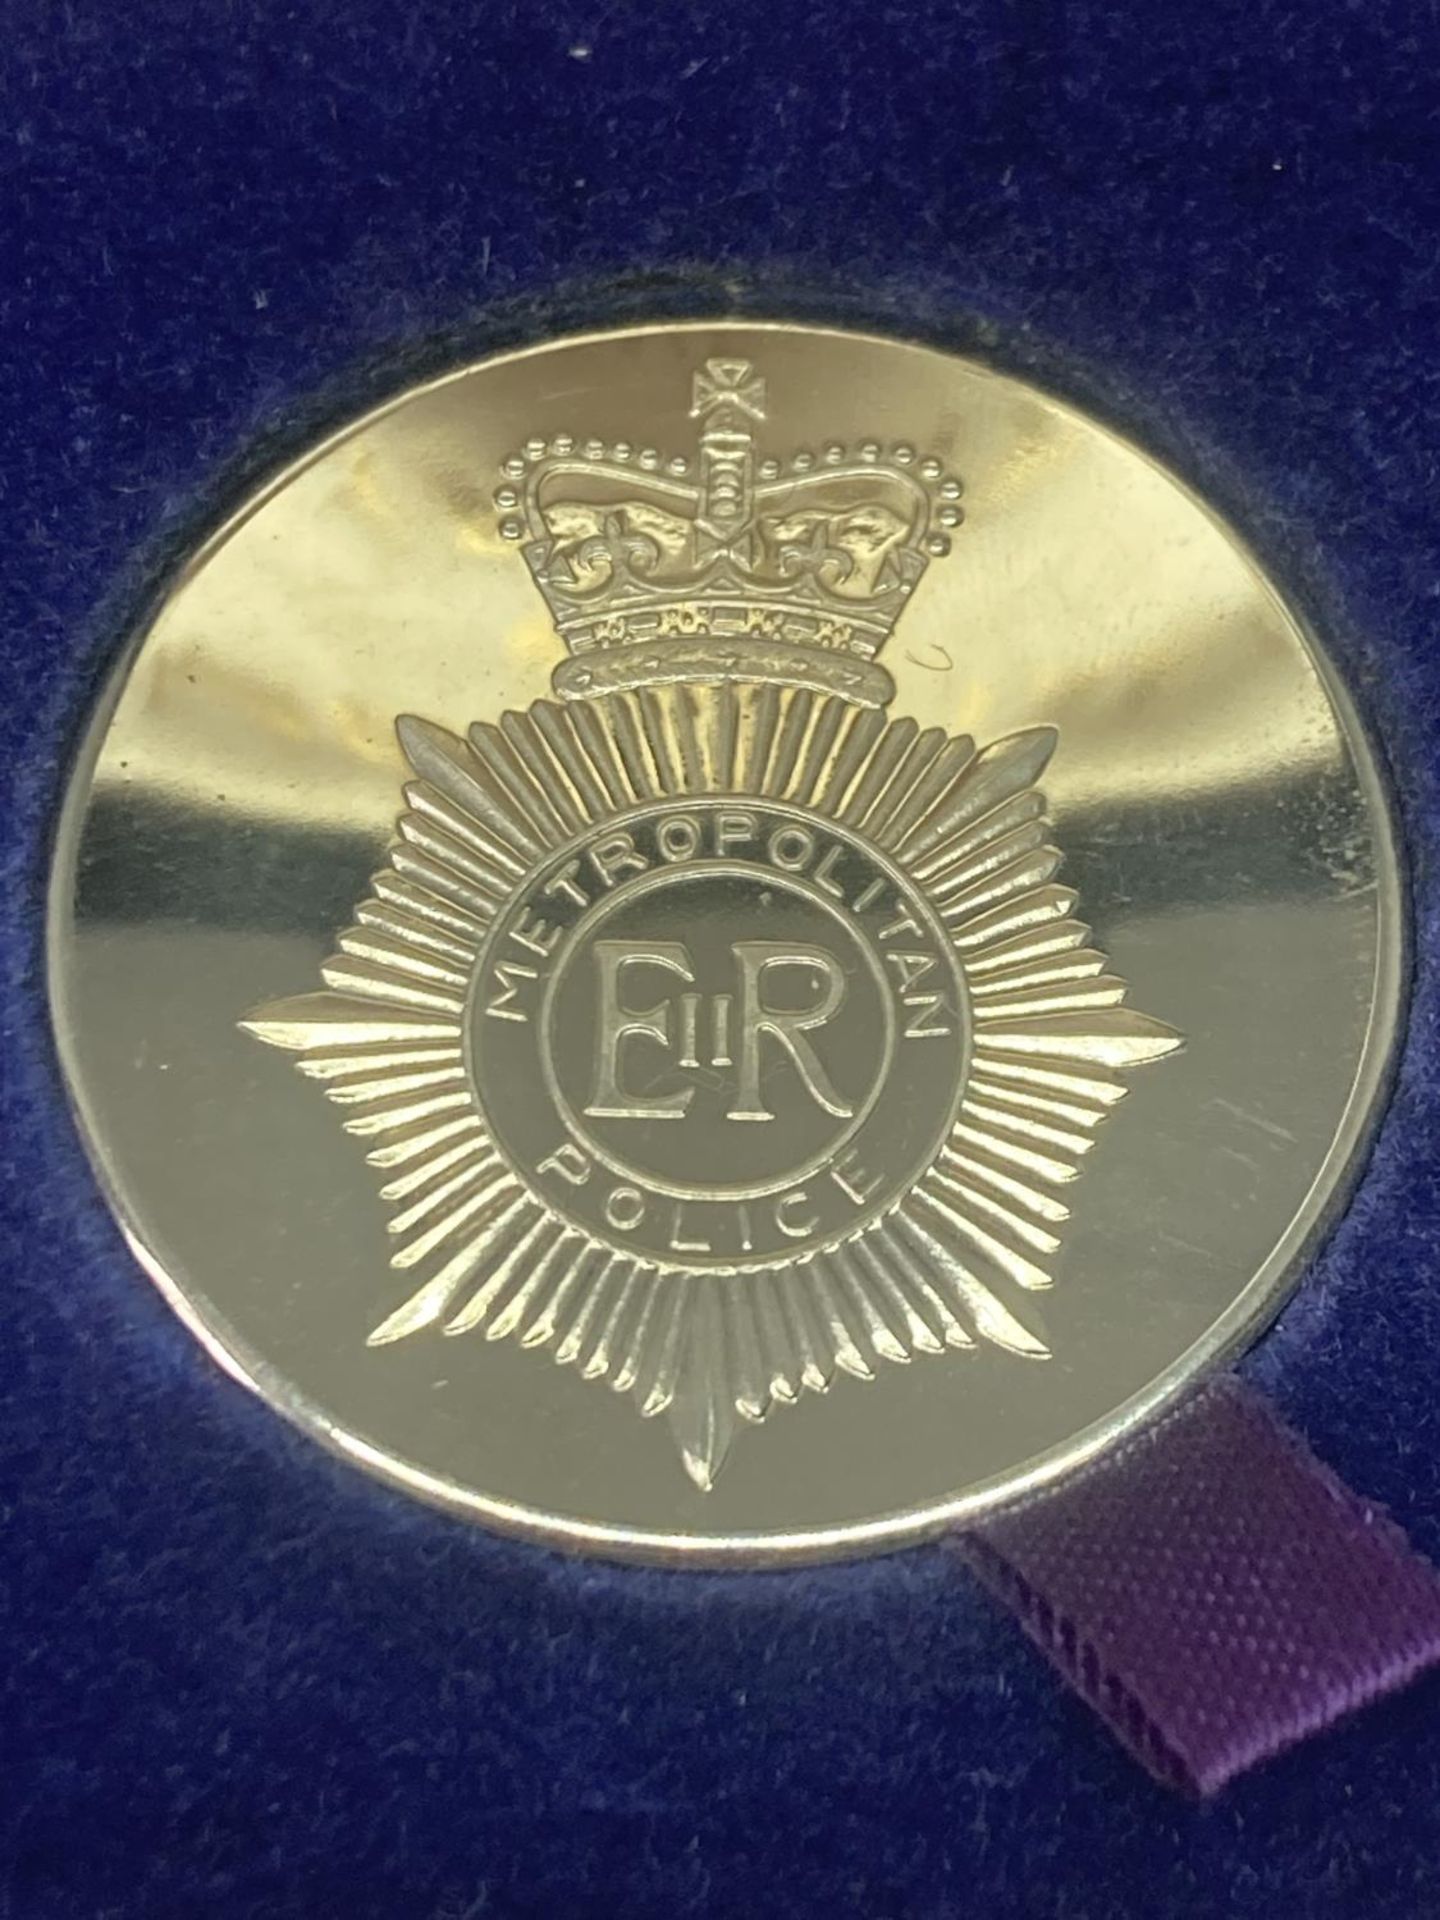 A SILVER TOWER MINT METROPOLITAN POLICE 150TH ANNIVERSARY MEDAL IN A PRESENTATION BOX - Image 4 of 8